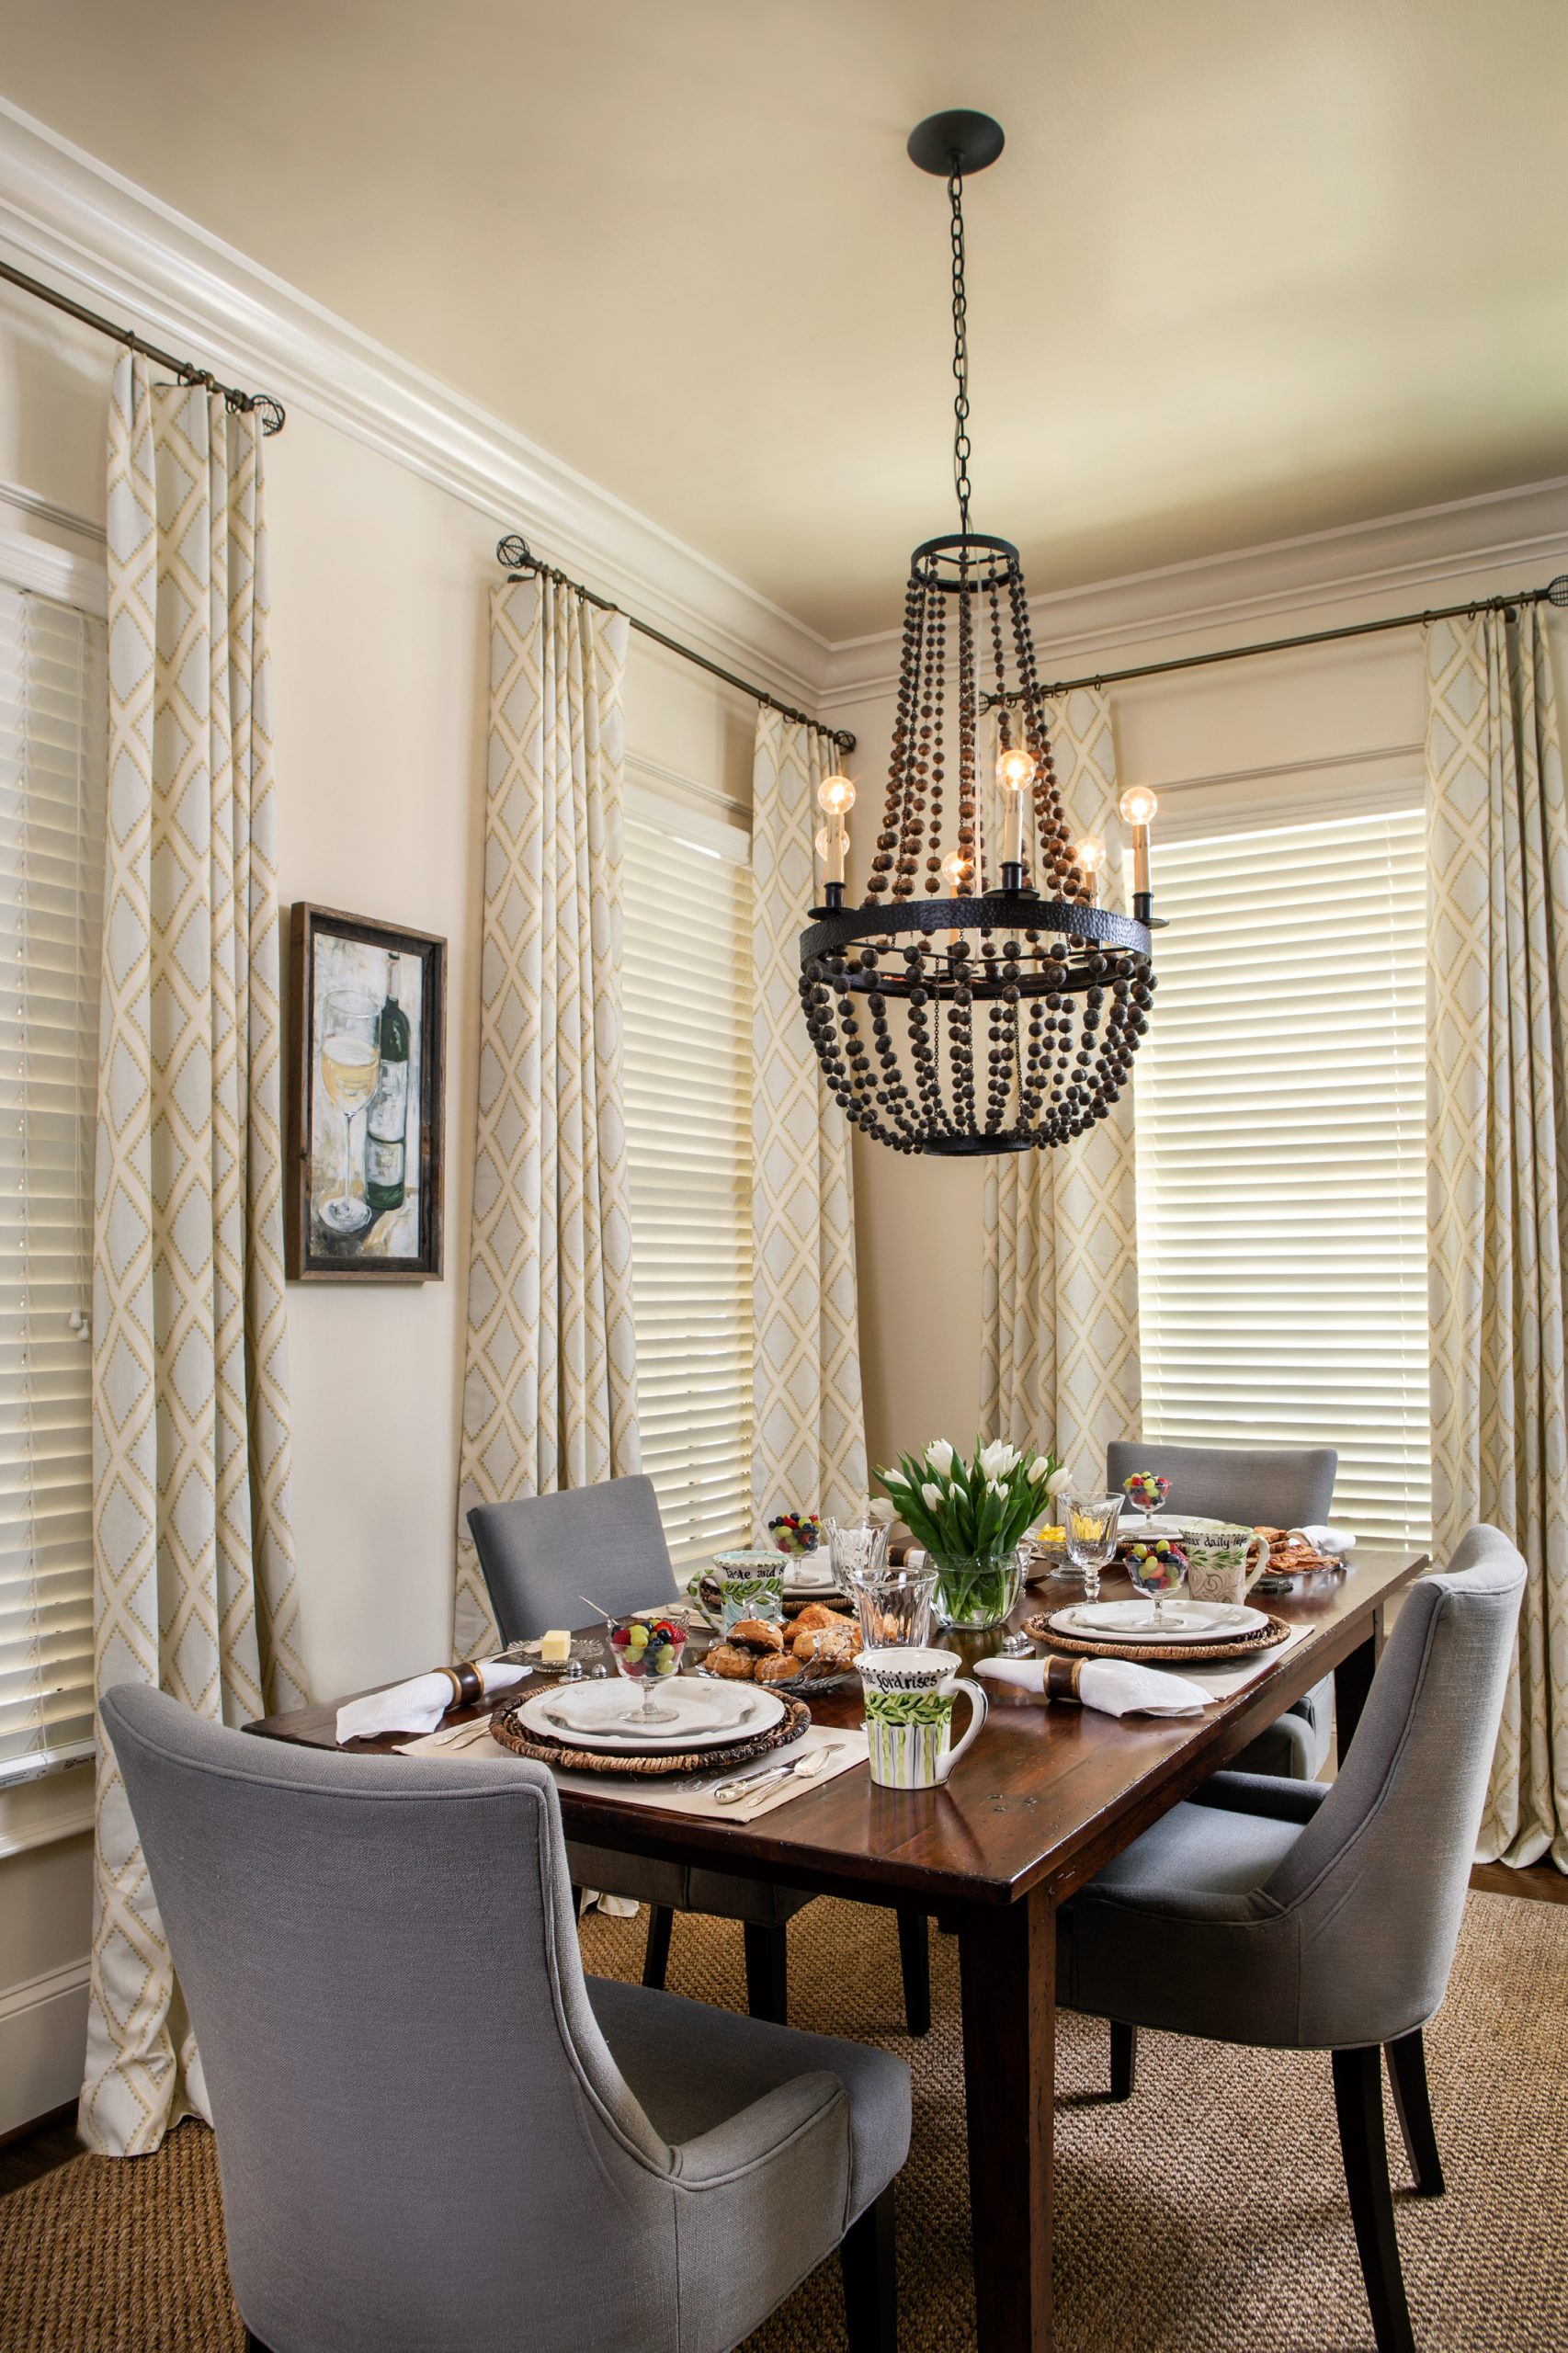 The breakfast room in the corner of the kitchen lit by a dark beaded chandelier is perfect for family meals with sons Matthew and Jordan and now daughter-in-law Amelia.